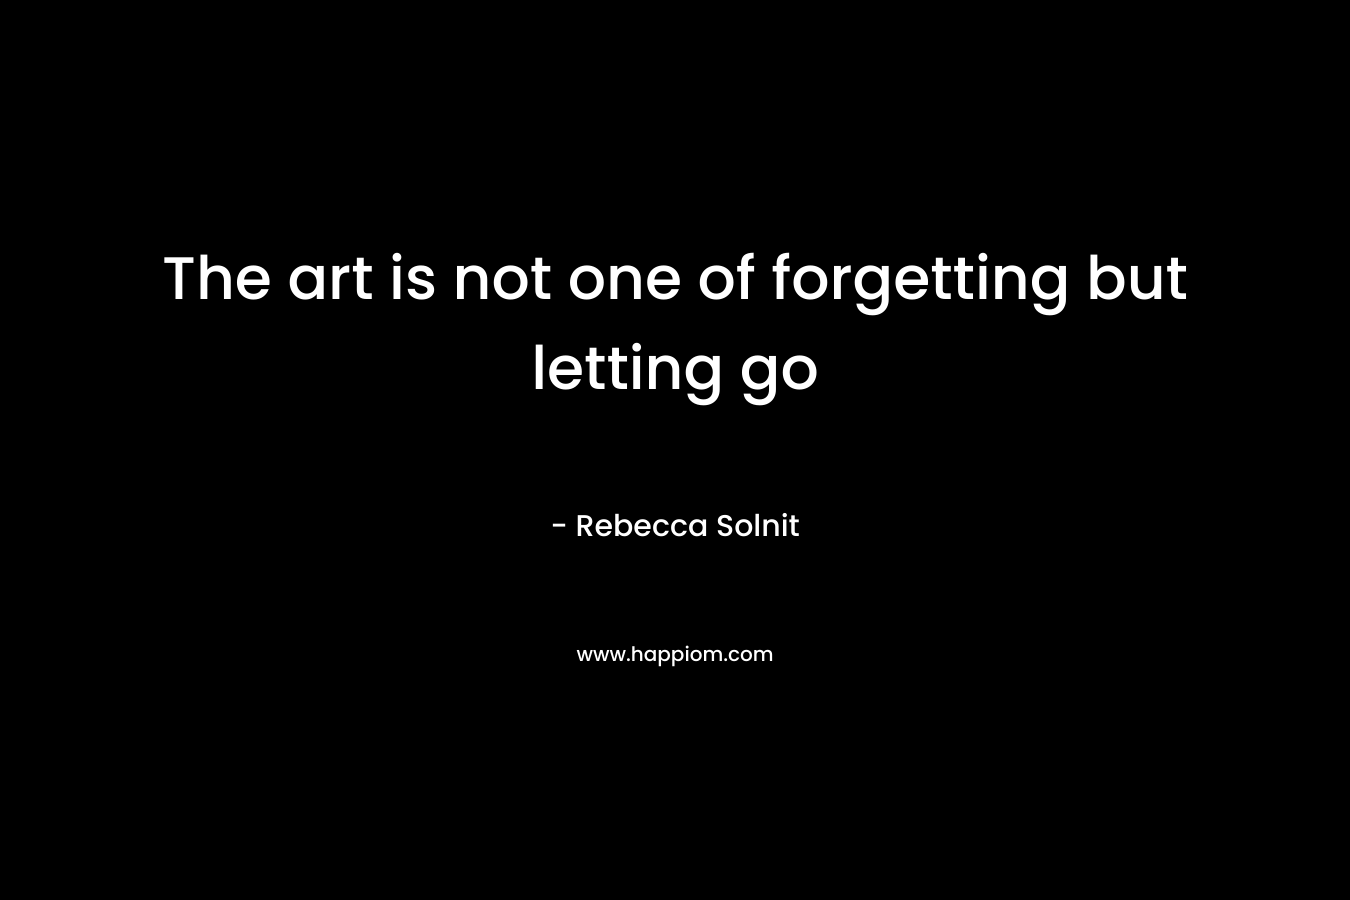 The art is not one of forgetting but letting go – Rebecca Solnit